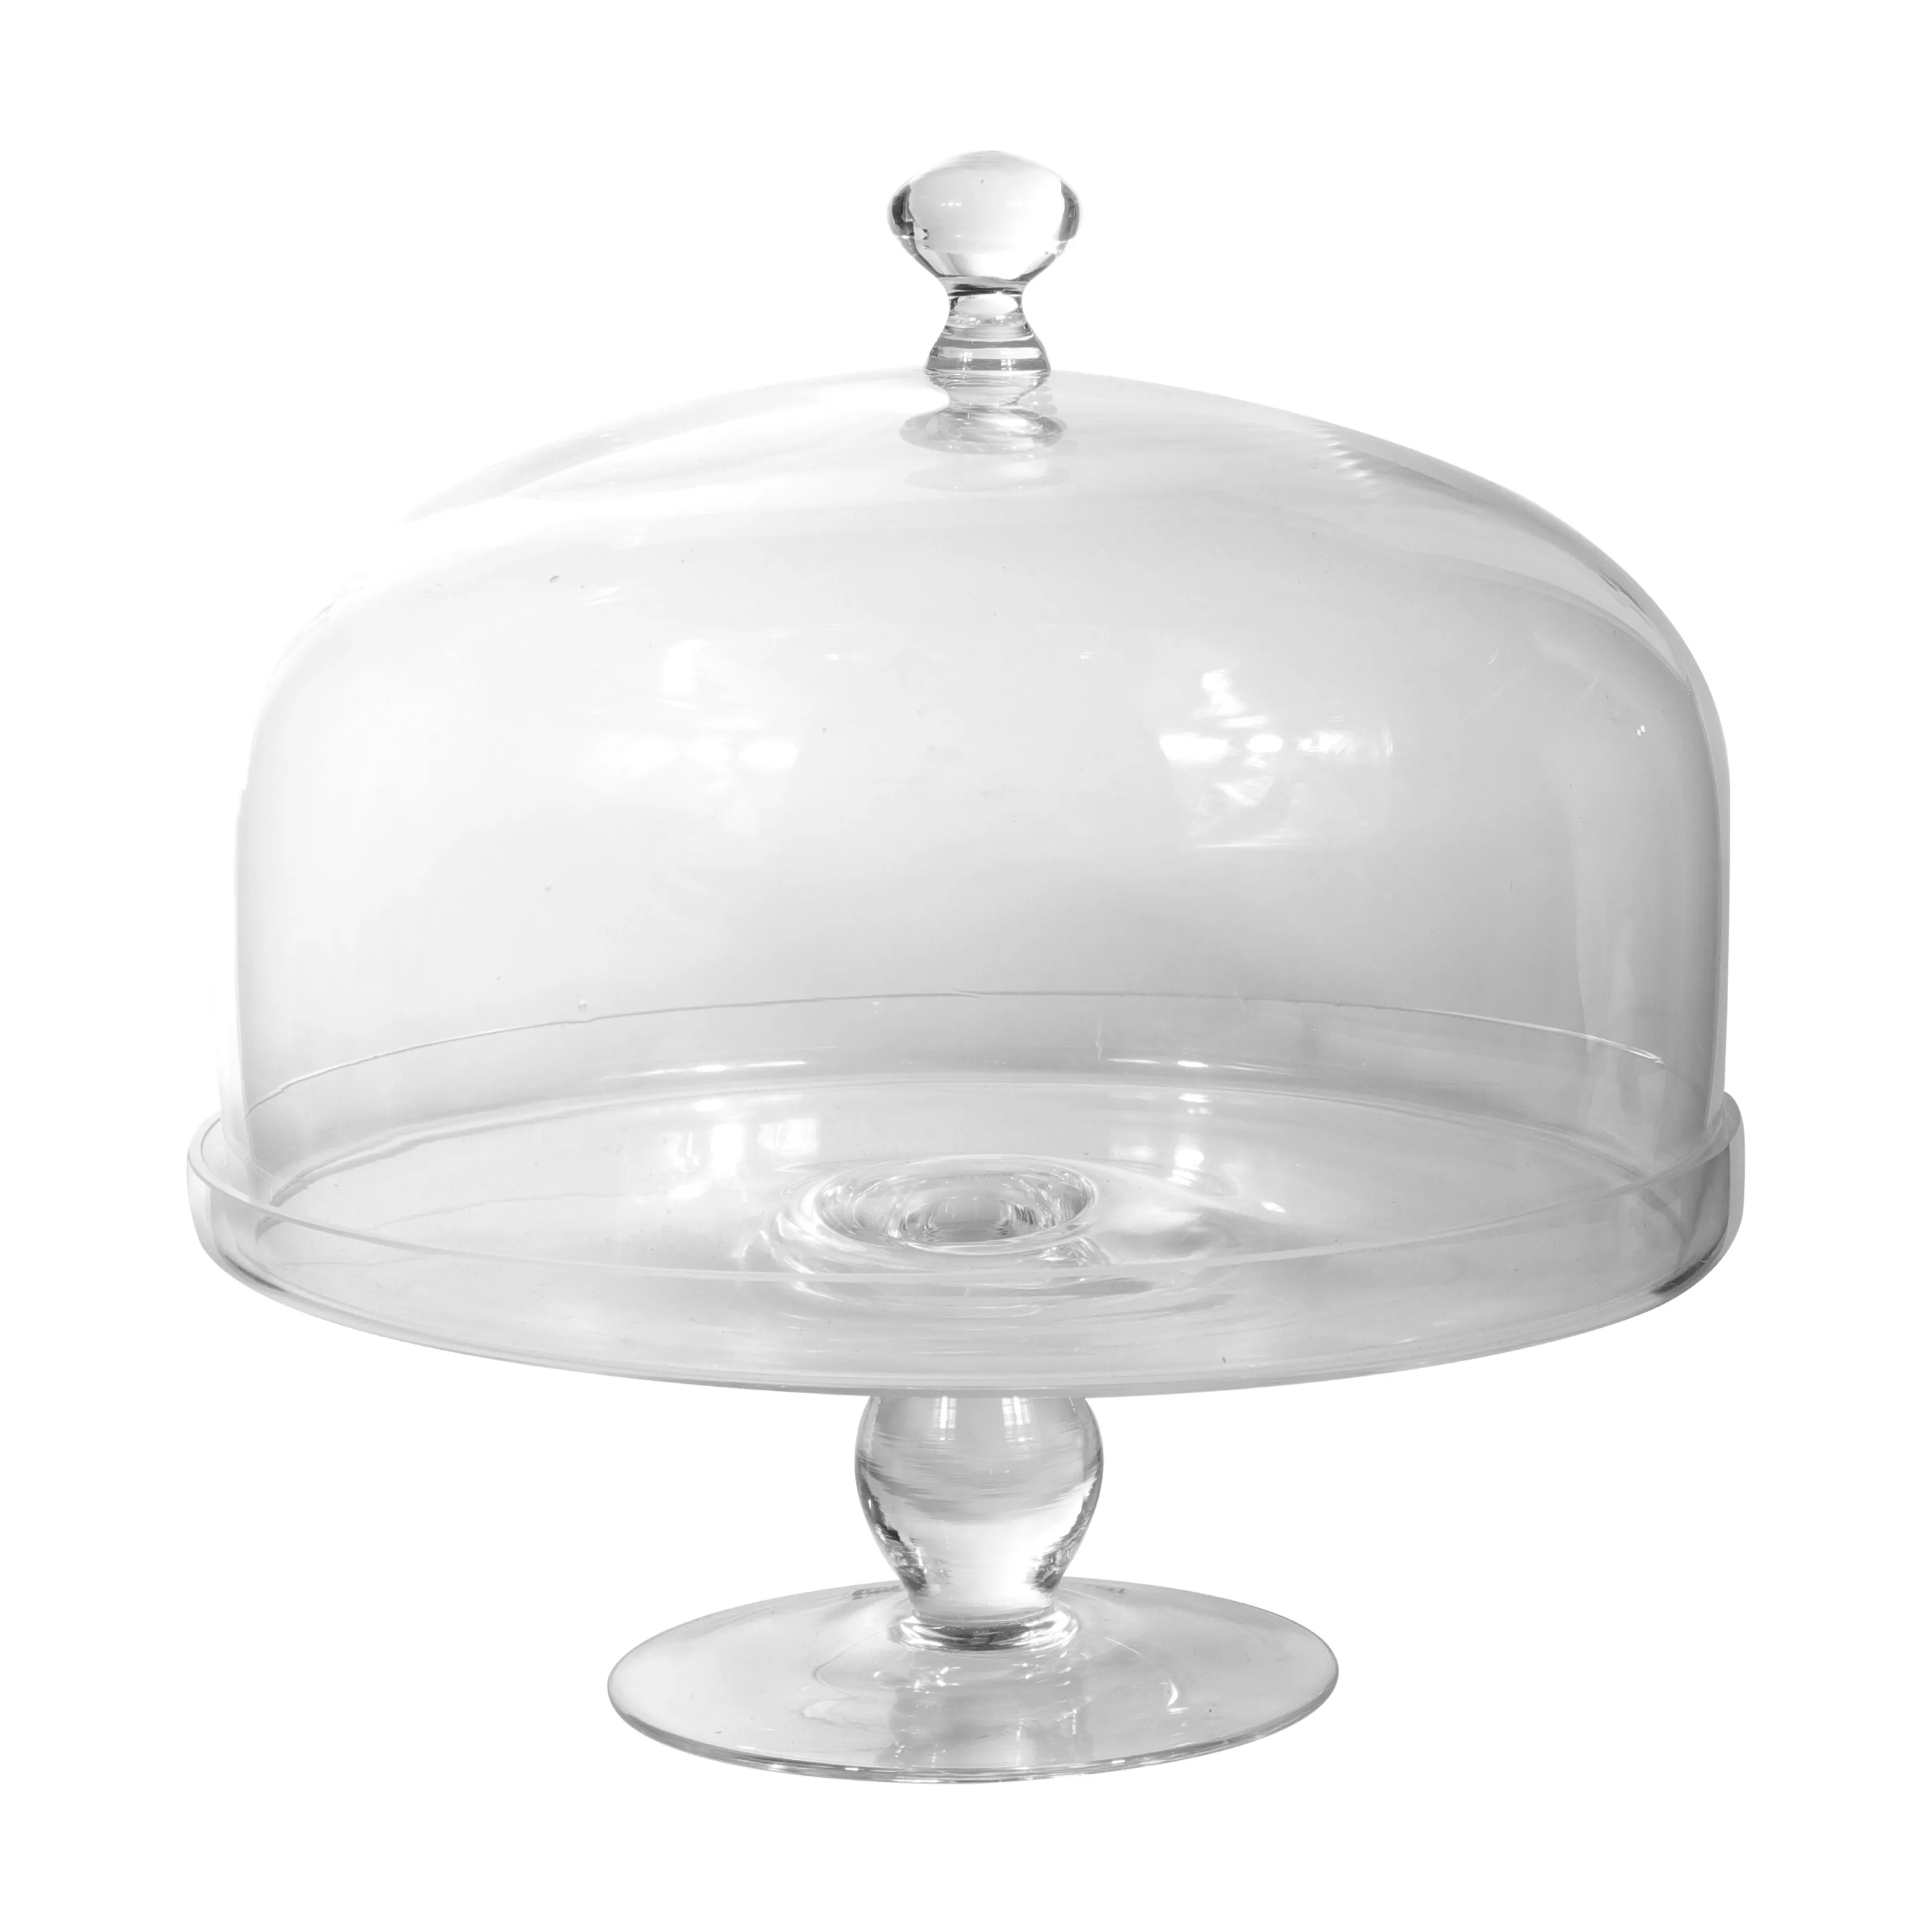 Royalford  29CM Glass Cake Dom with Stand - Footed Cake Plate with Dome - Party Centerpiece Dessert Stand Cake Dome - Serving Stand, Food Dome